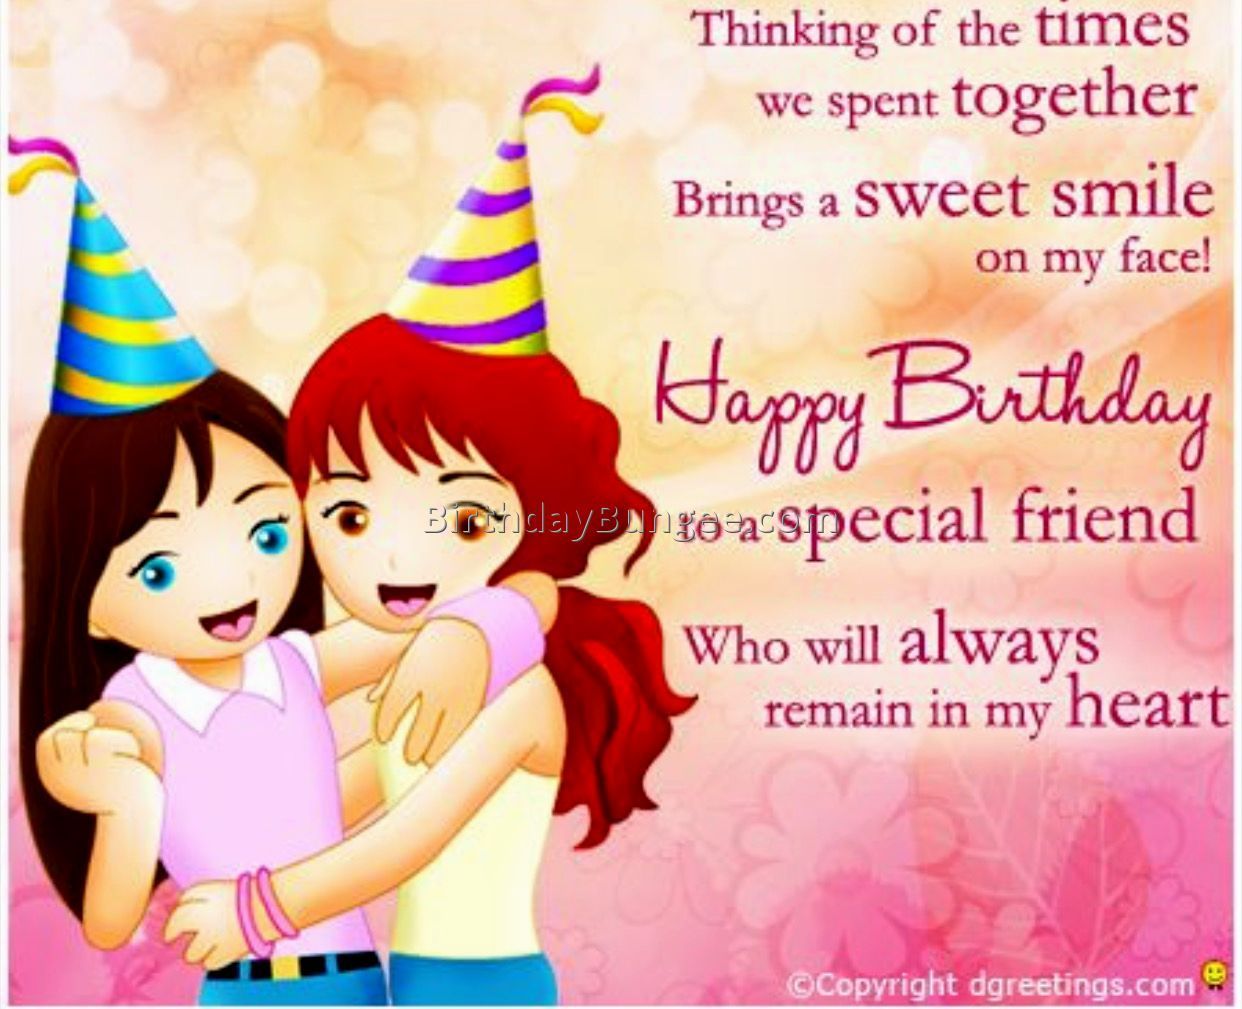 Happy Birthday Quotes For Best Friend Resource Wallon Wallpaper birthday friend female girl or woman happy. Friend birthday quotes, Happy birthday teenager, Happy birthday quotes for friends